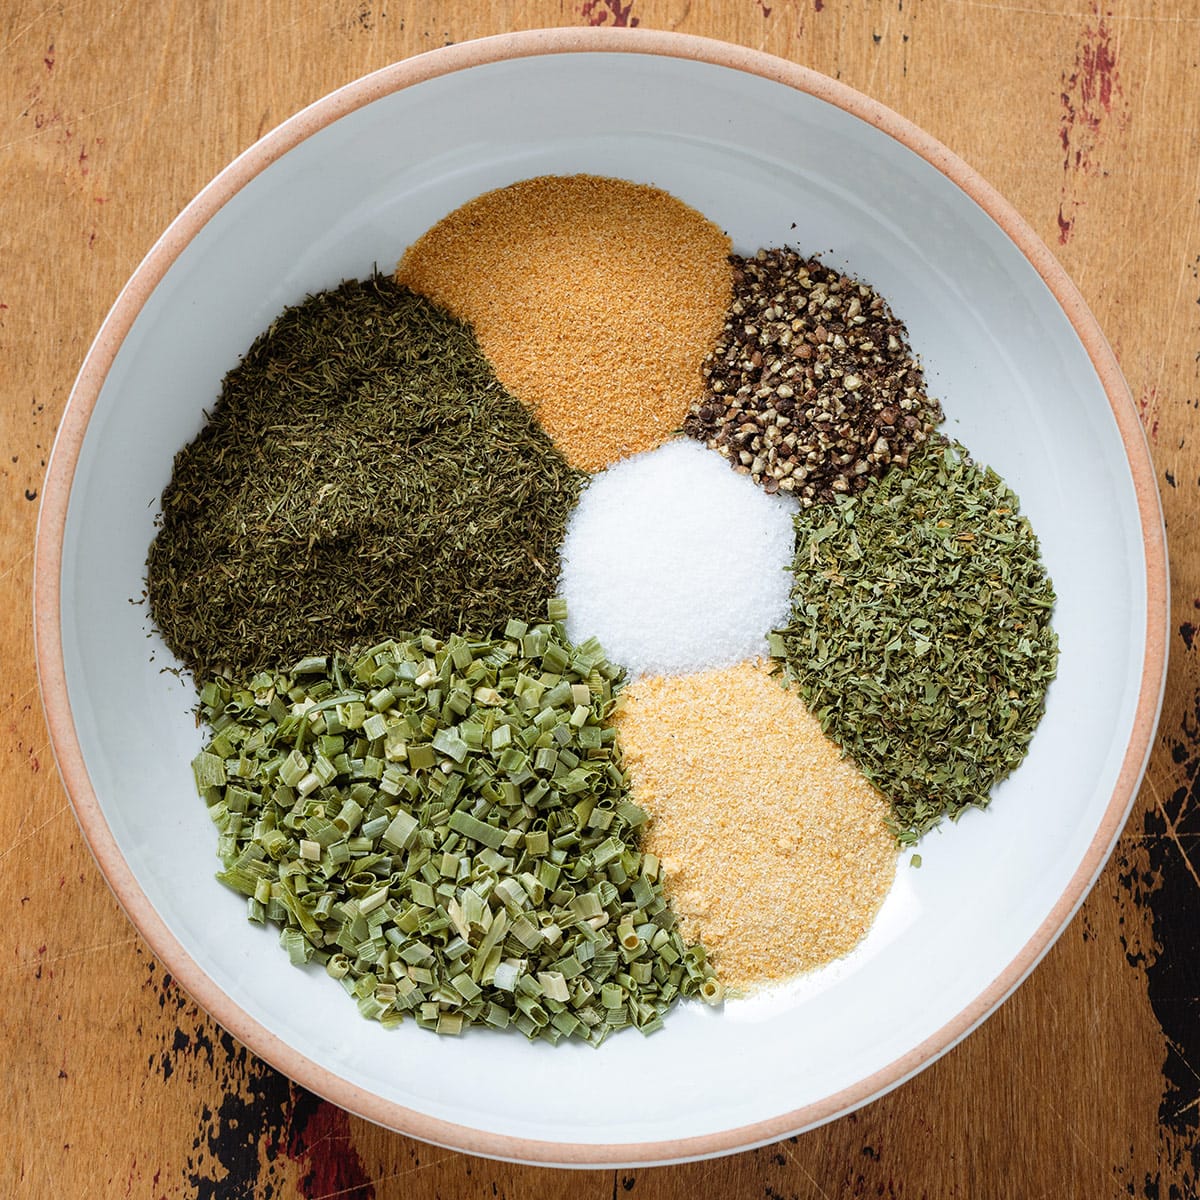 Herbs and spices neatly separated in a white bowl with a beige rim.